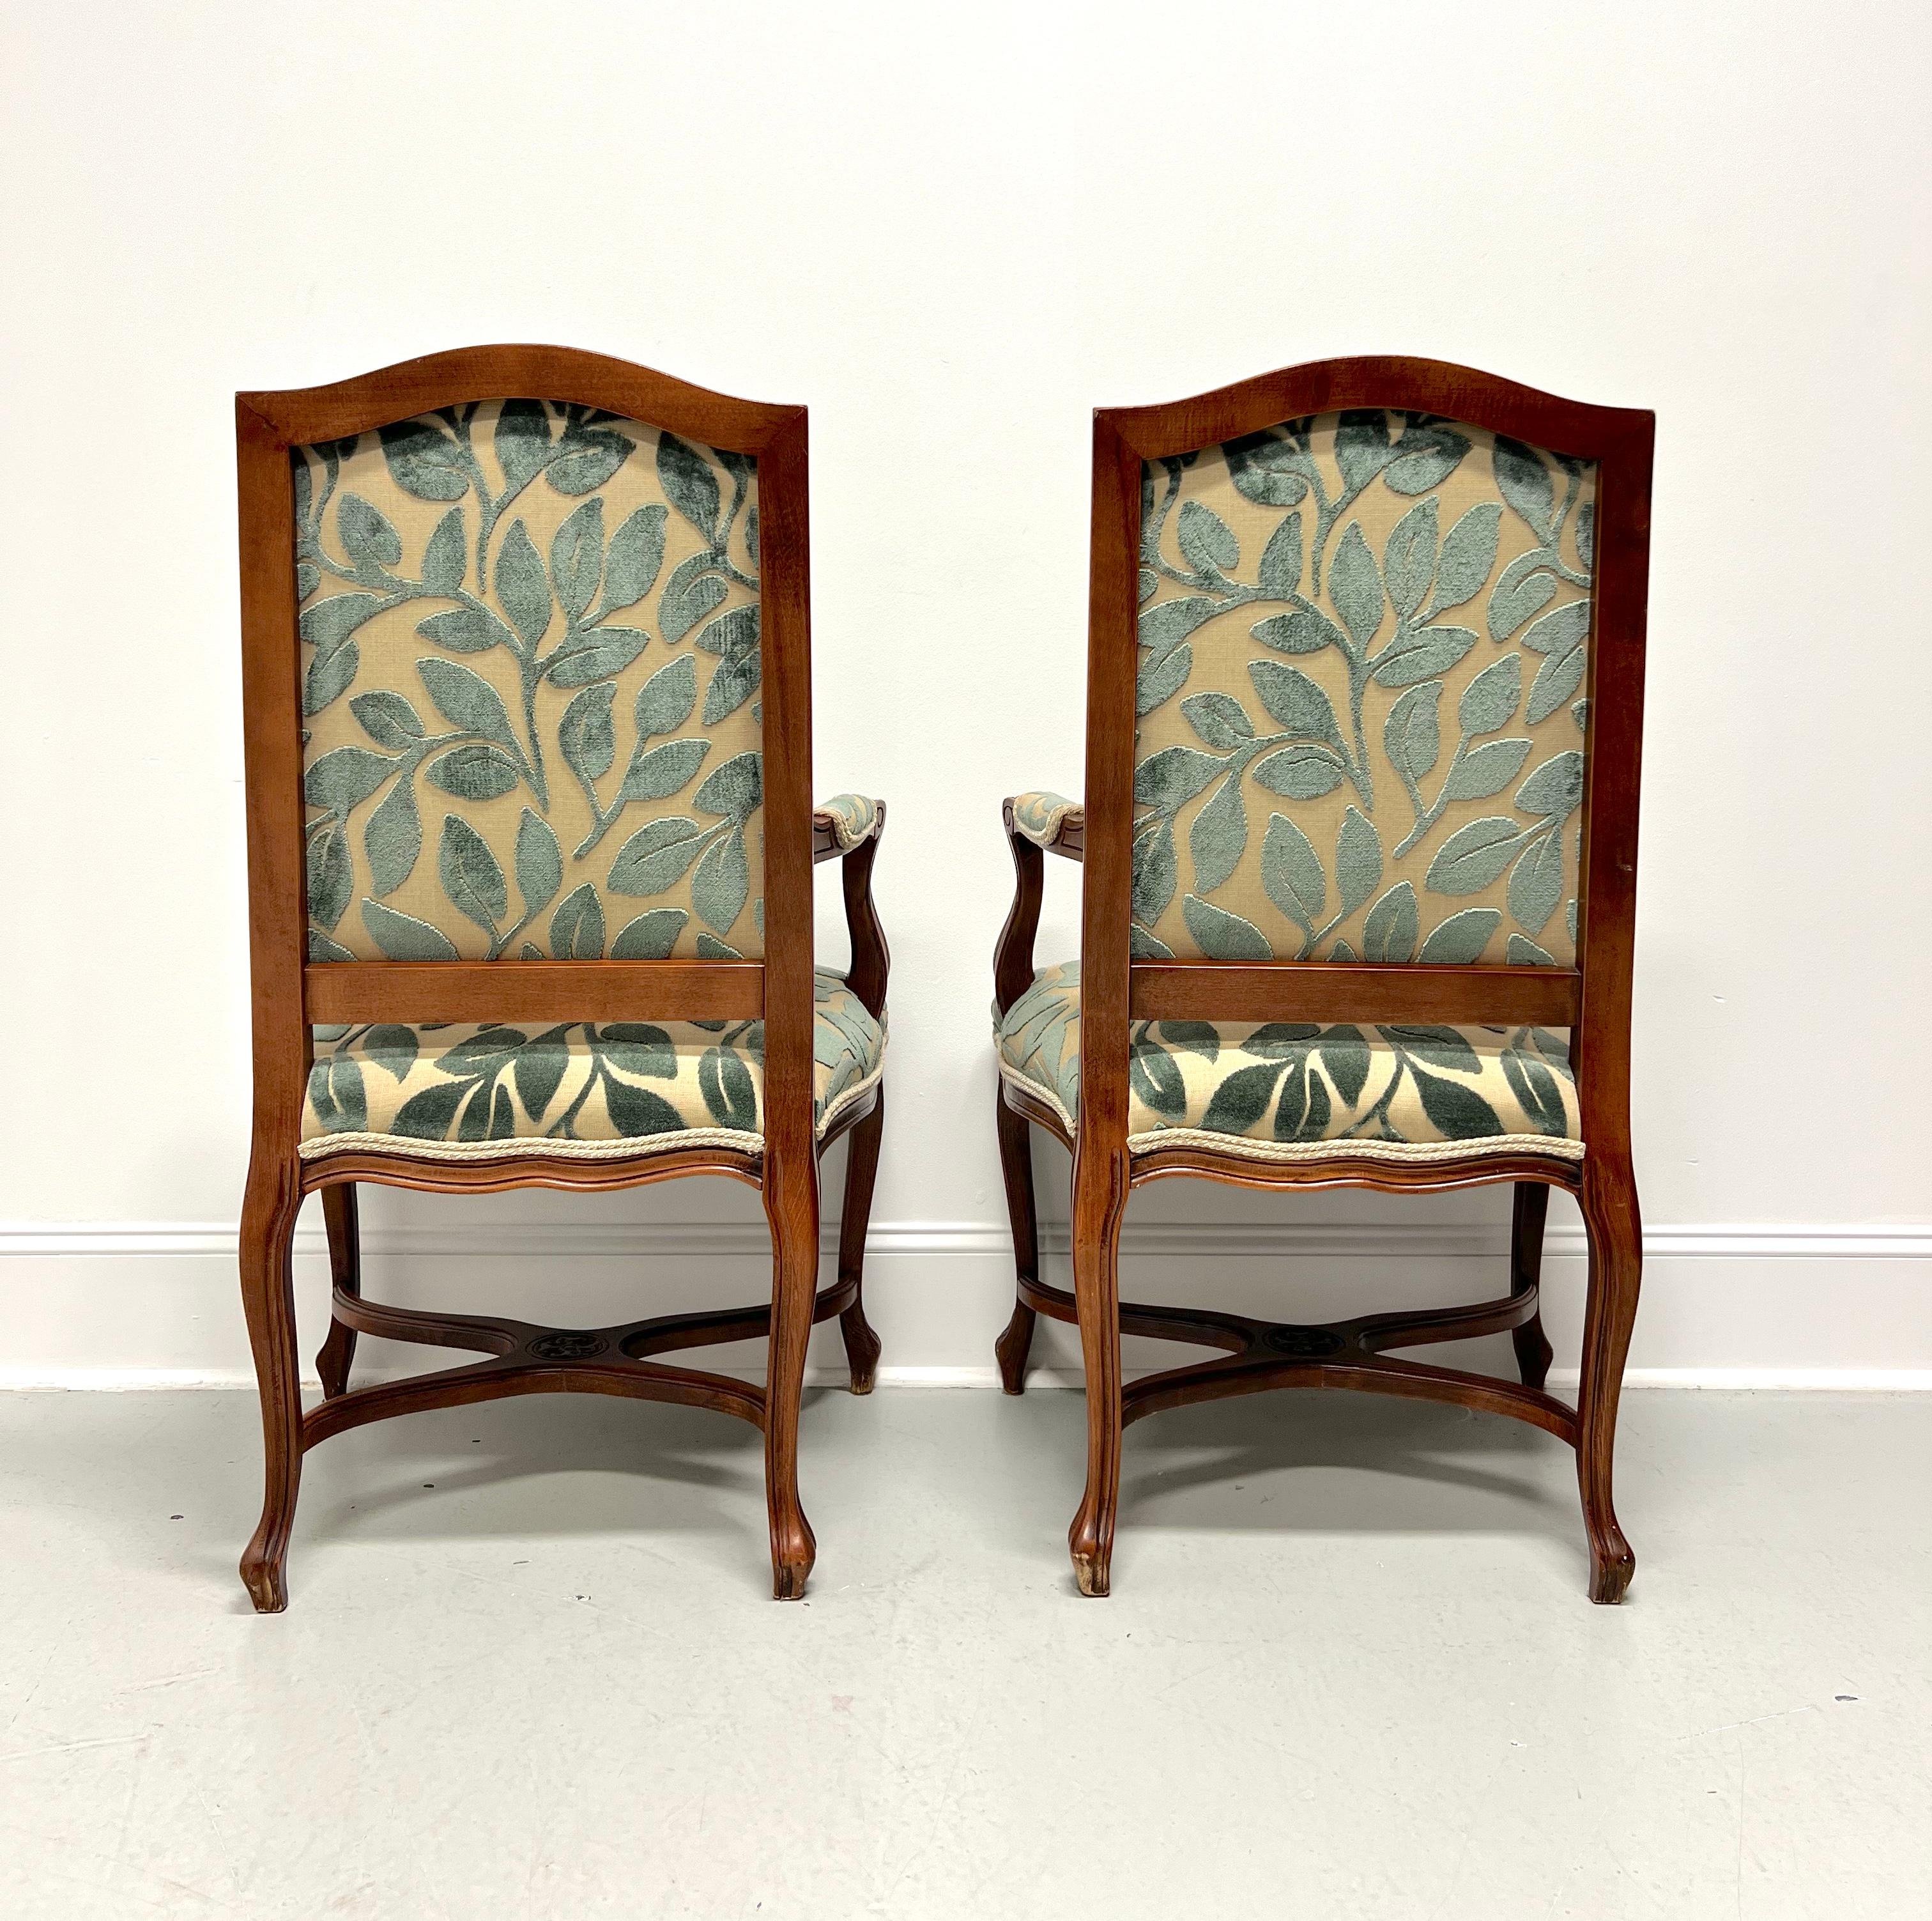 20th Century French Country Louis XV Walnut Fauteuils Open-Arm Armchairs - Pair In Good Condition For Sale In Charlotte, NC